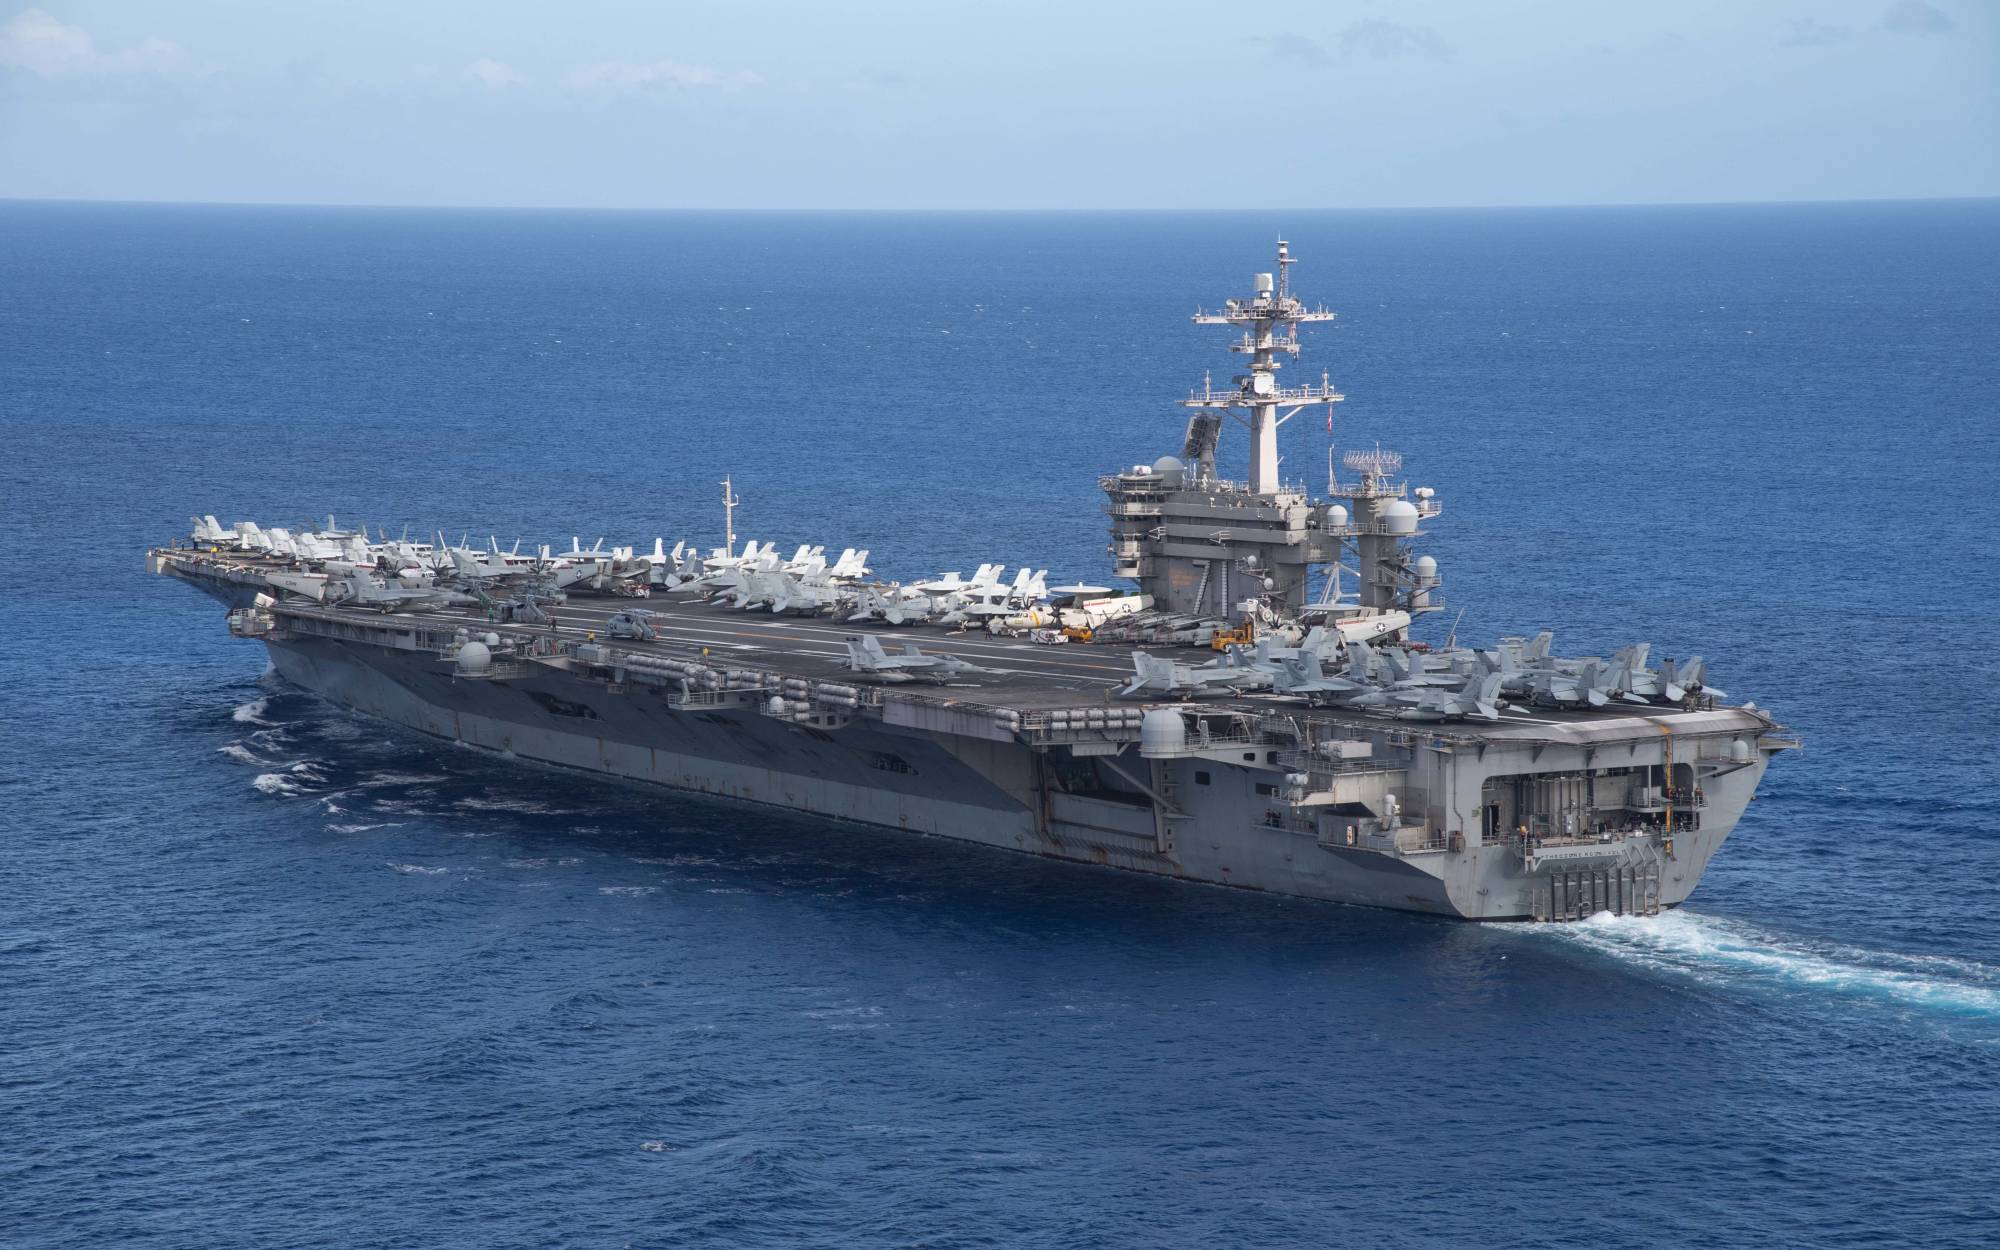 The aircraft carrier USS Theodore Roosevelt operates in the Philippine Sea on May 21, following an extended visit to Guam in the midst of the coronavirus pandemic. | U.S. NAVY